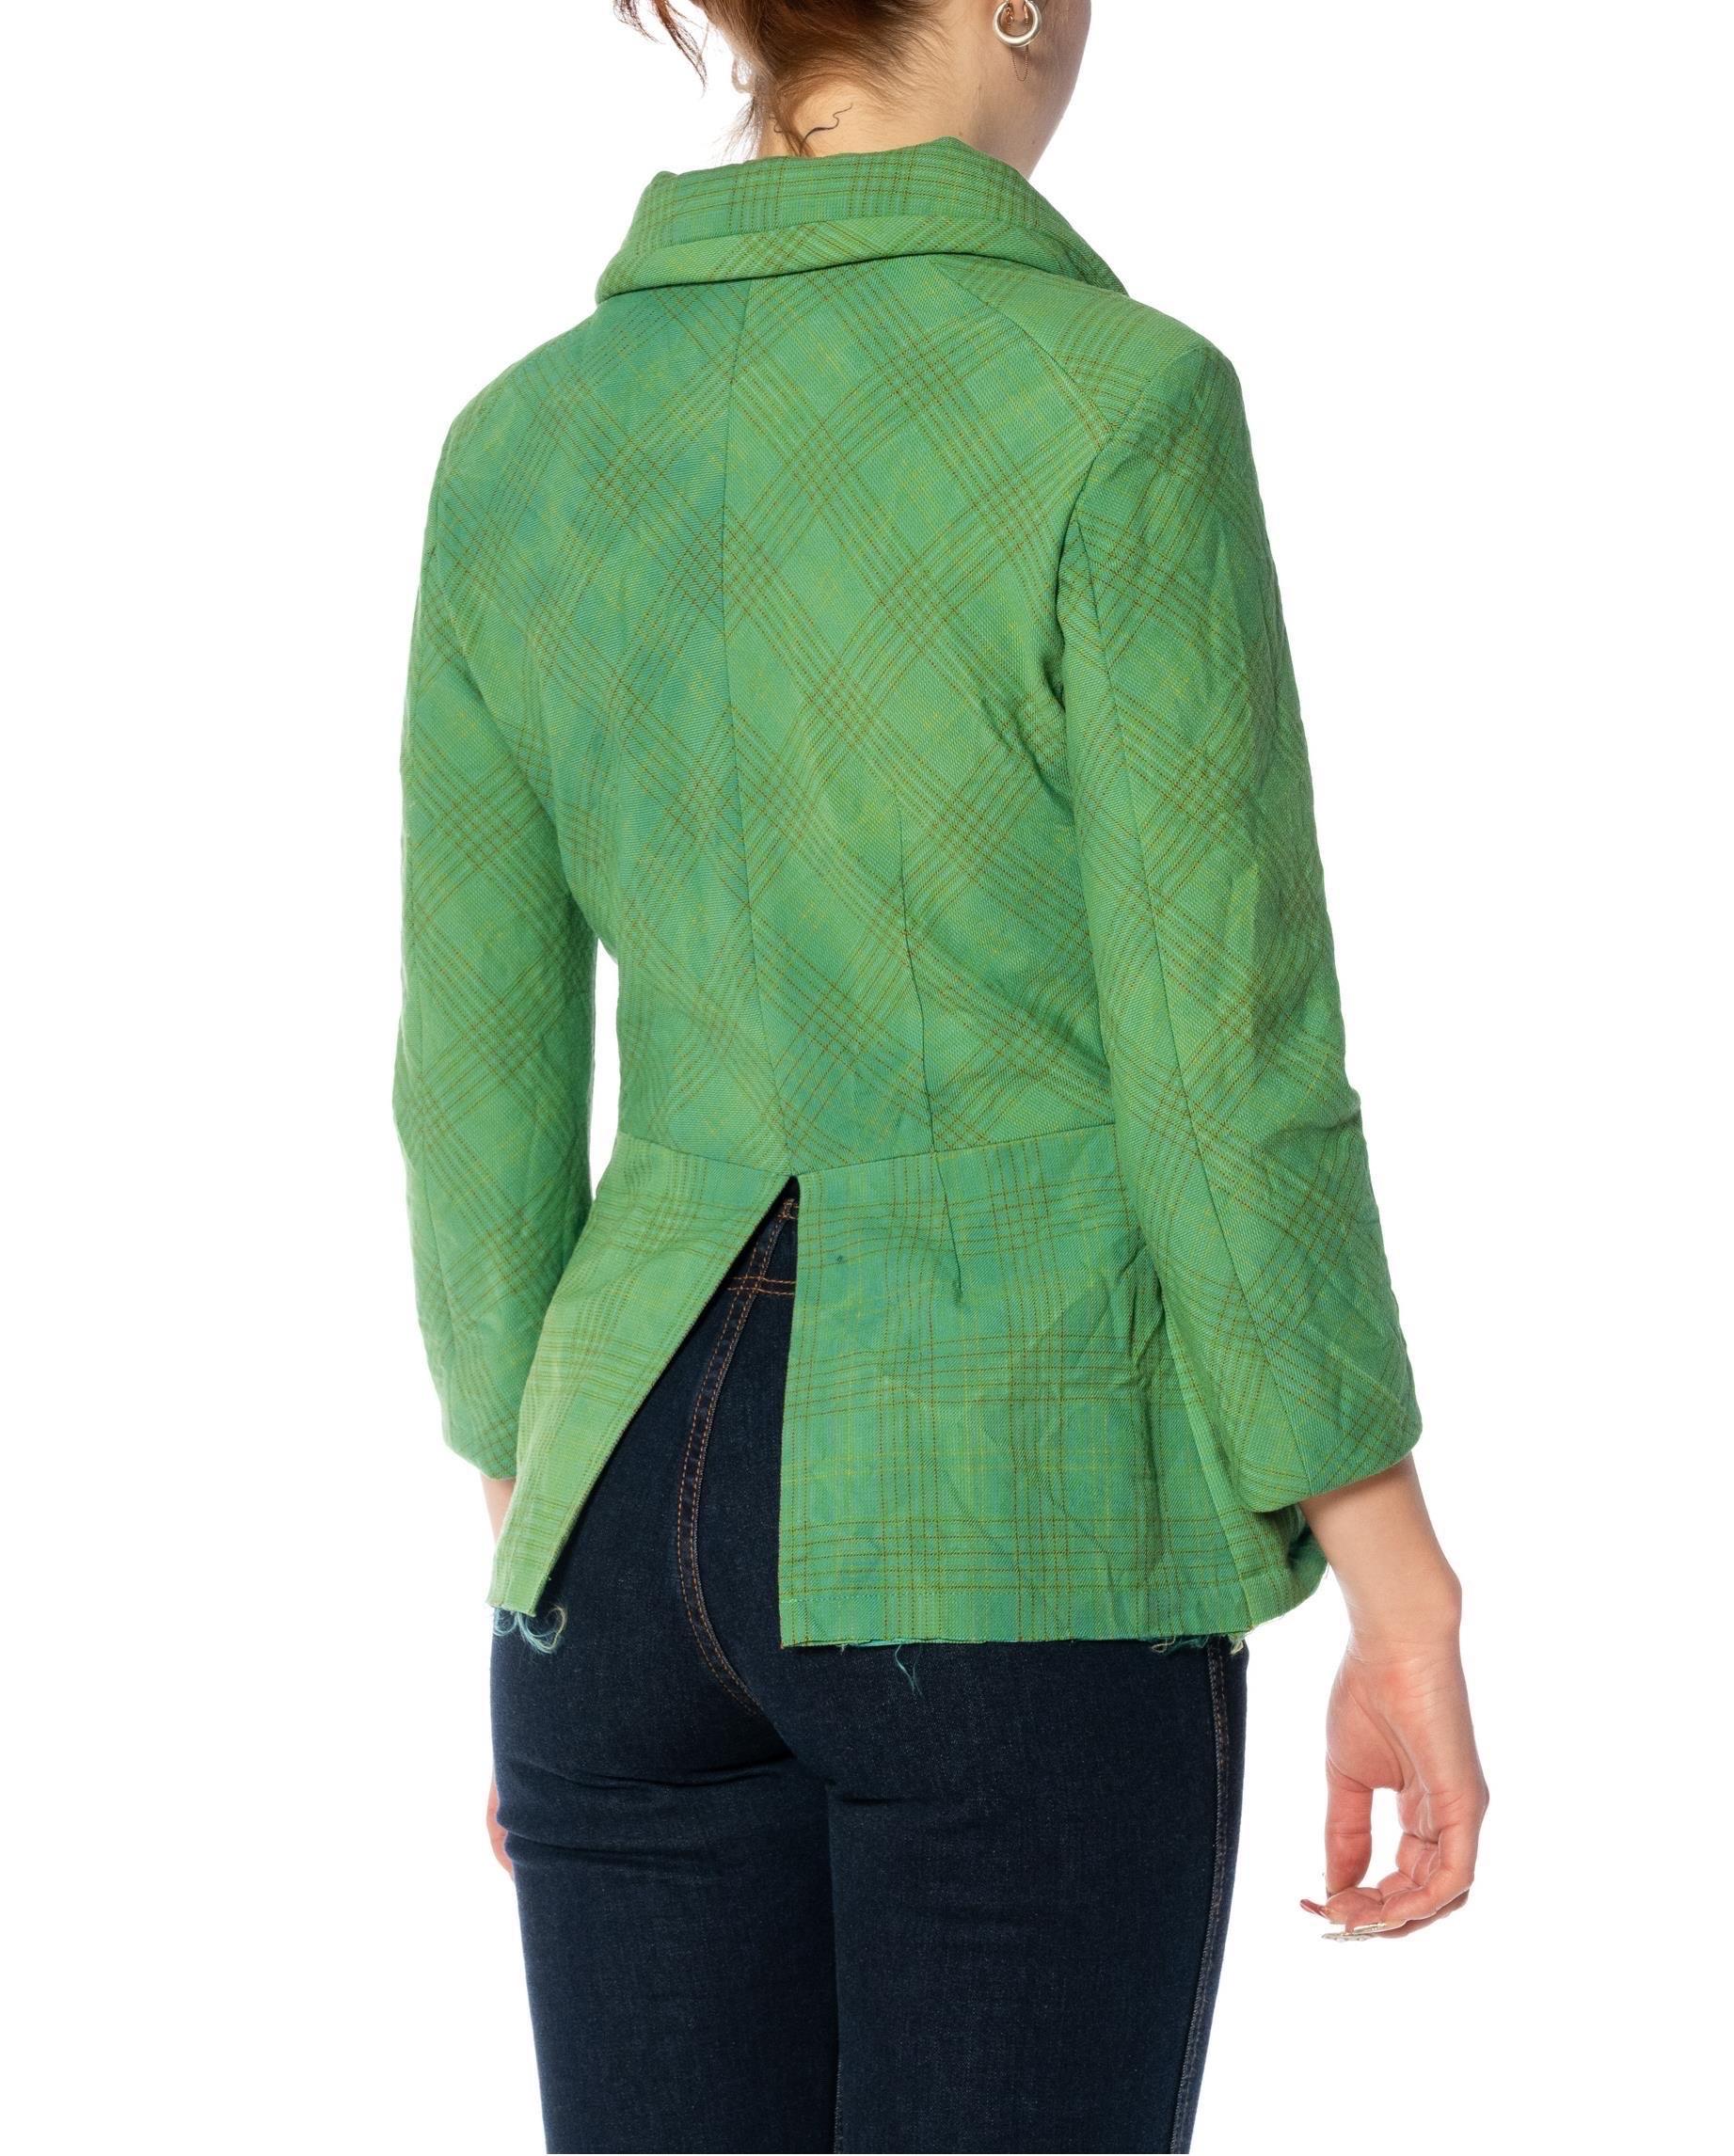 2000S JUNYA WATANABE COMME DES GARCONS Green Wrinkled Wool Jacket With Deconstr For Sale 5